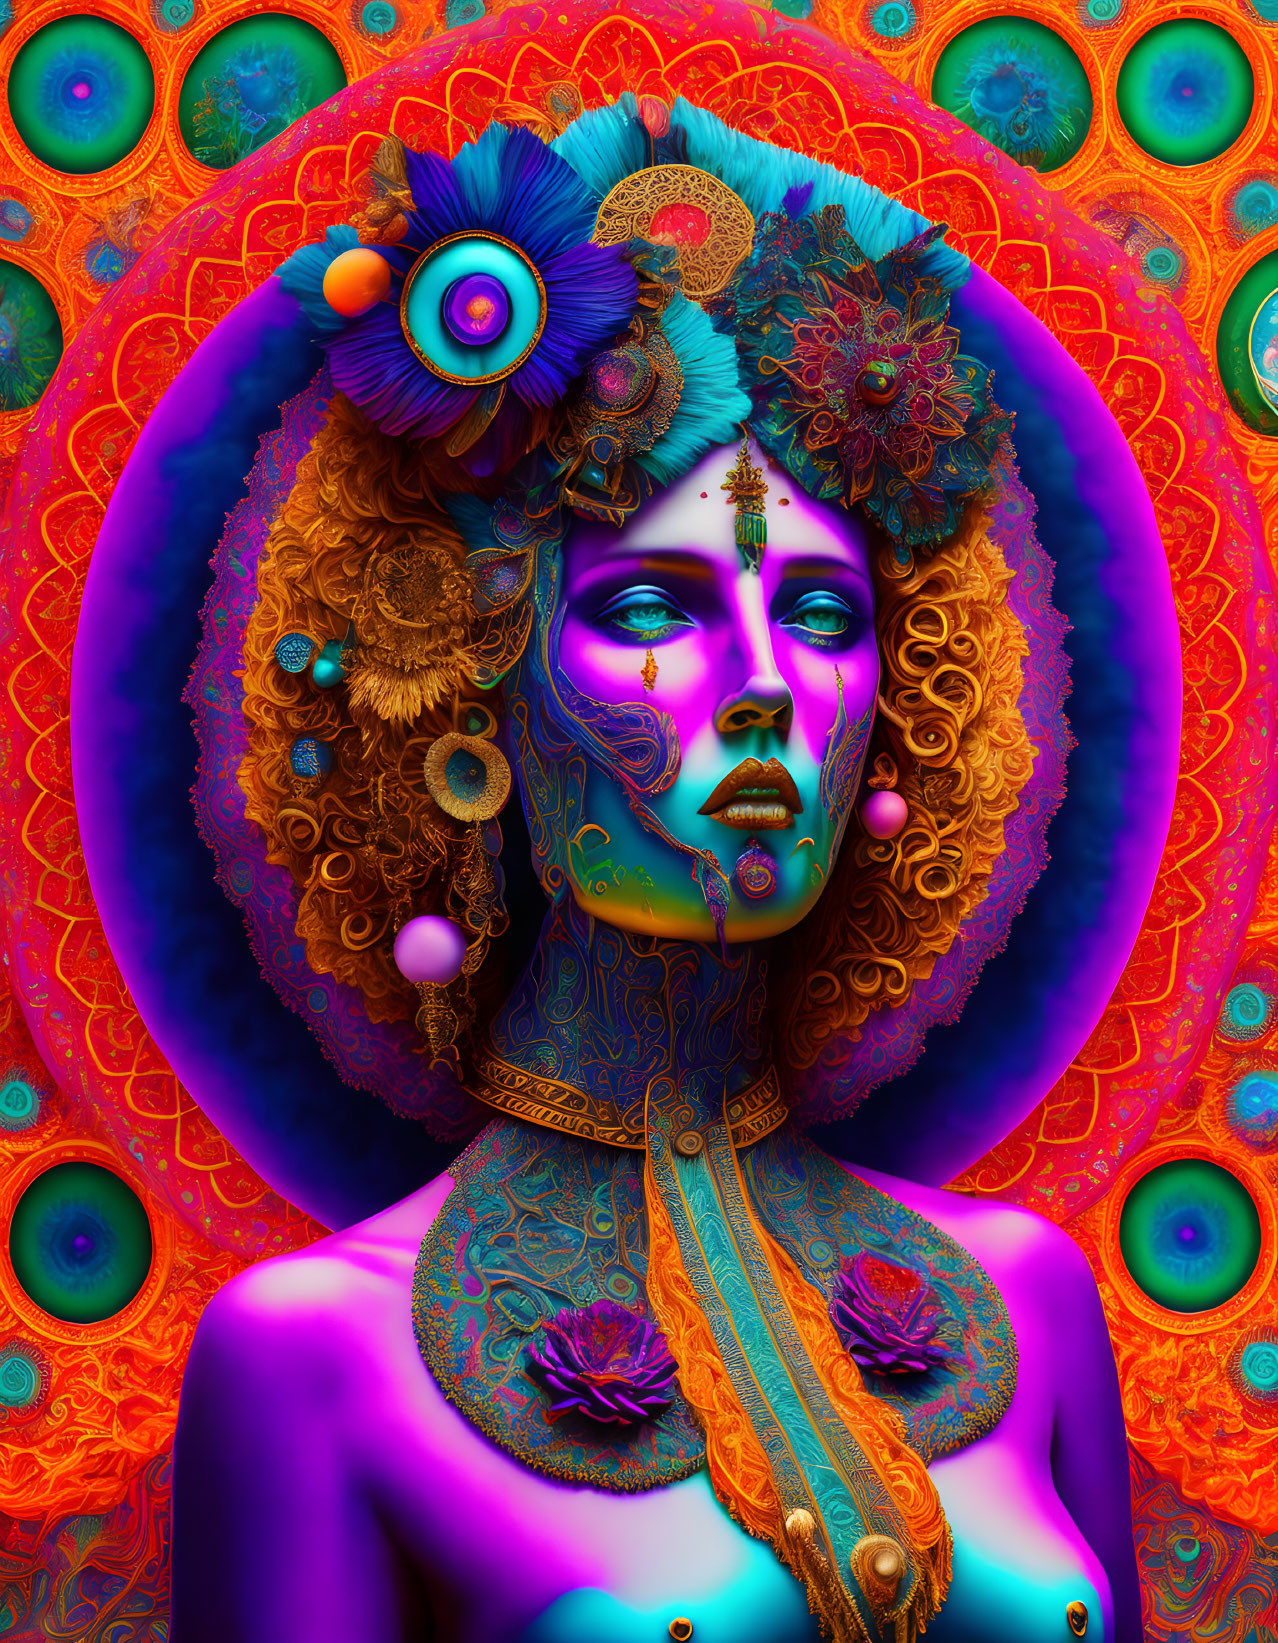 Colorful Woman Portrait with Peacock Motif in Blue and Orange Tones